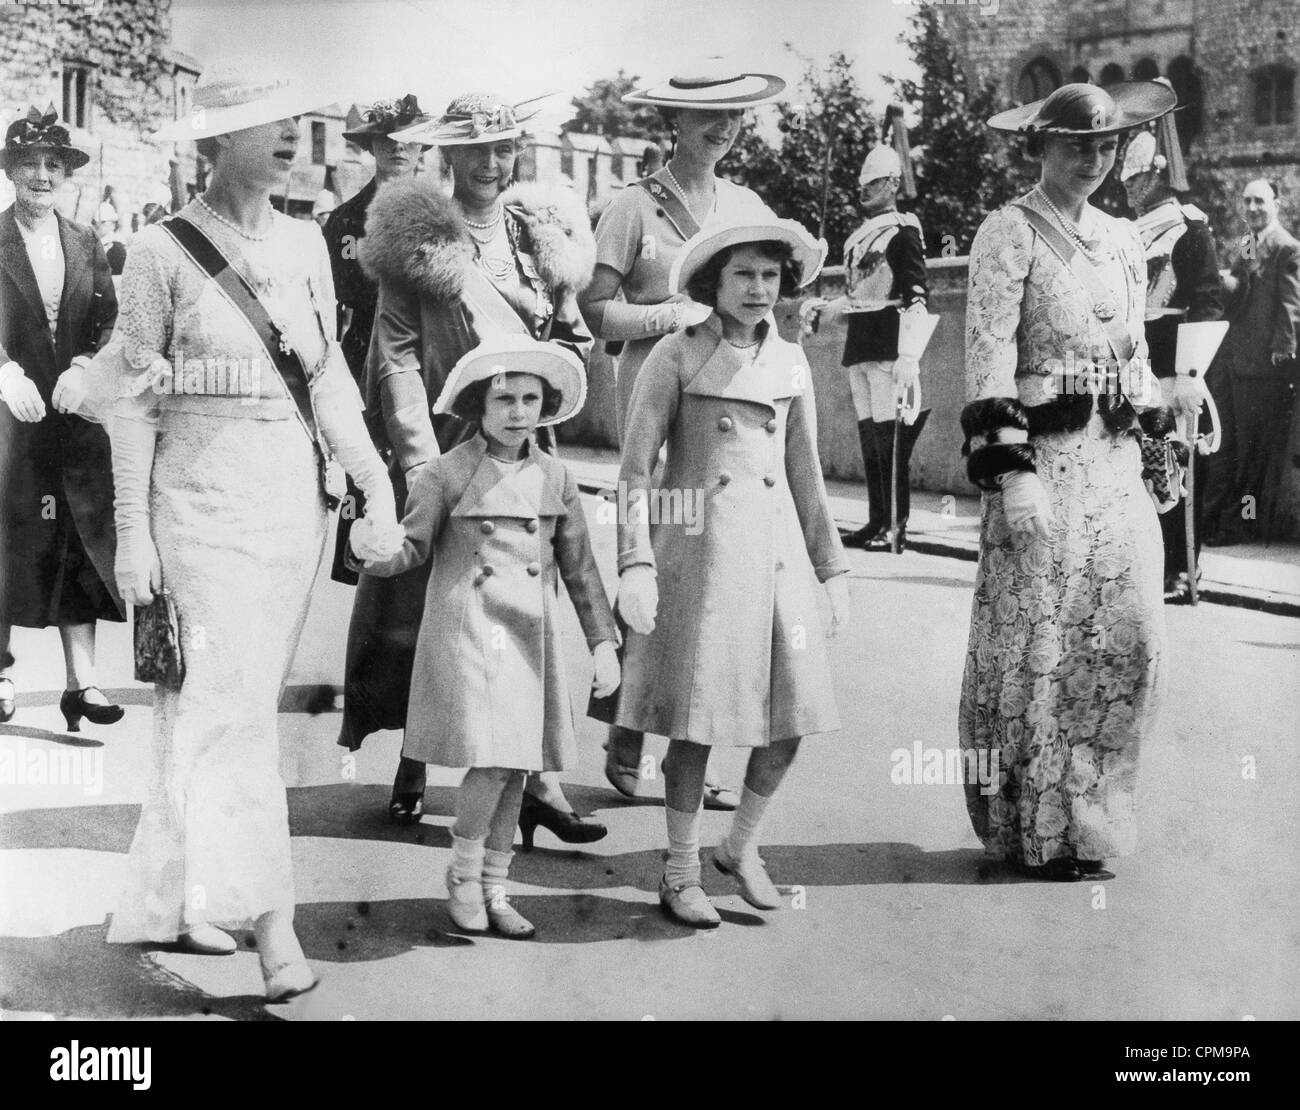 Members of the British royal family in a procession at the Windsor Castle, 1937 Stock Photo